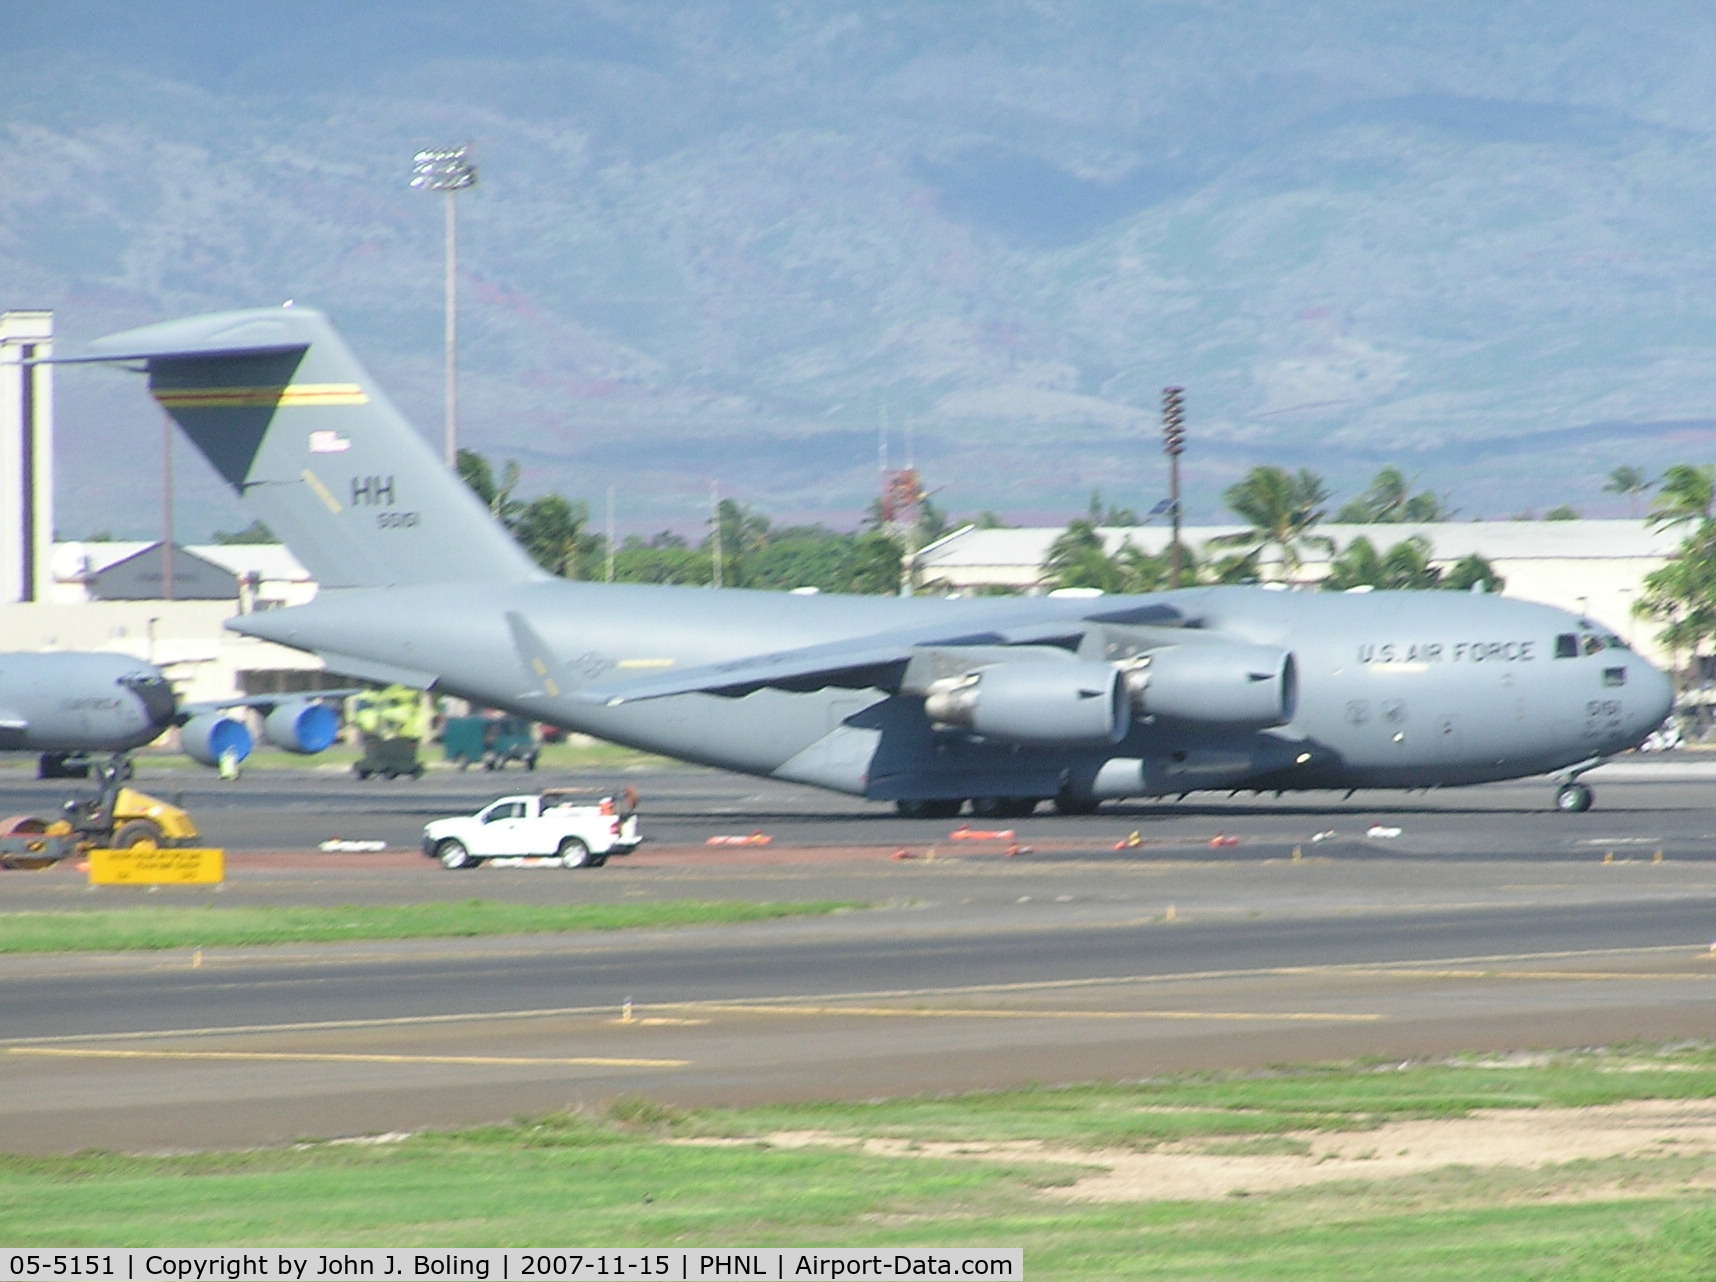 05-5151, 2005 Boeing C-17A Globemaster III C/N P-151, C-17 taxi out from Hickam AFB